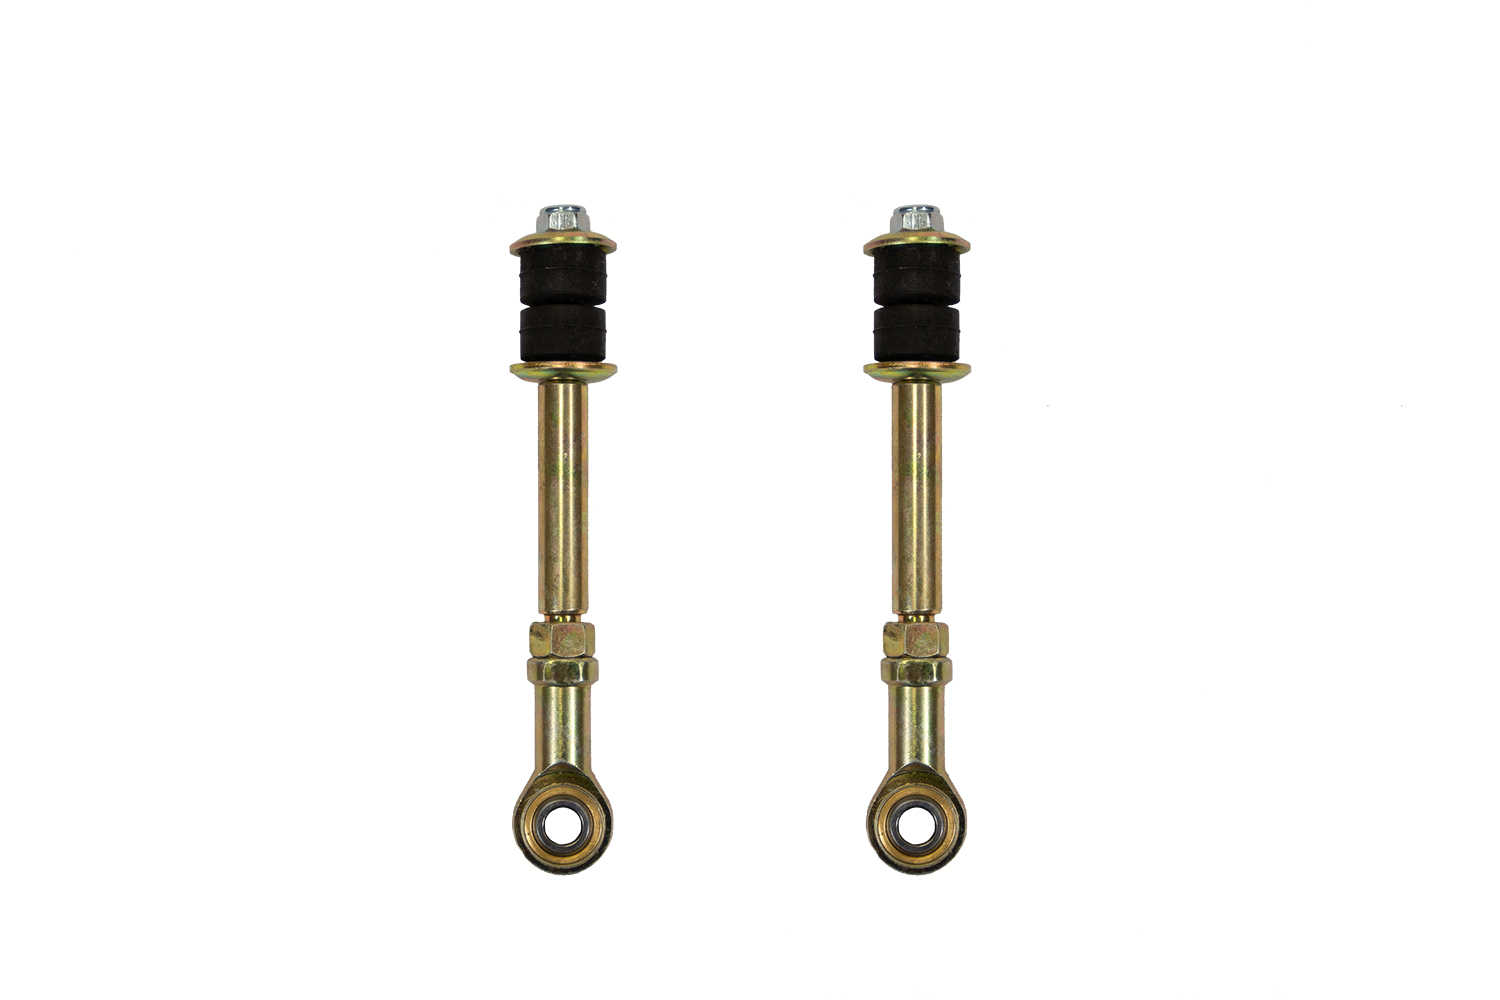 Extended Rear Sway Bar Link Kit for 0-3